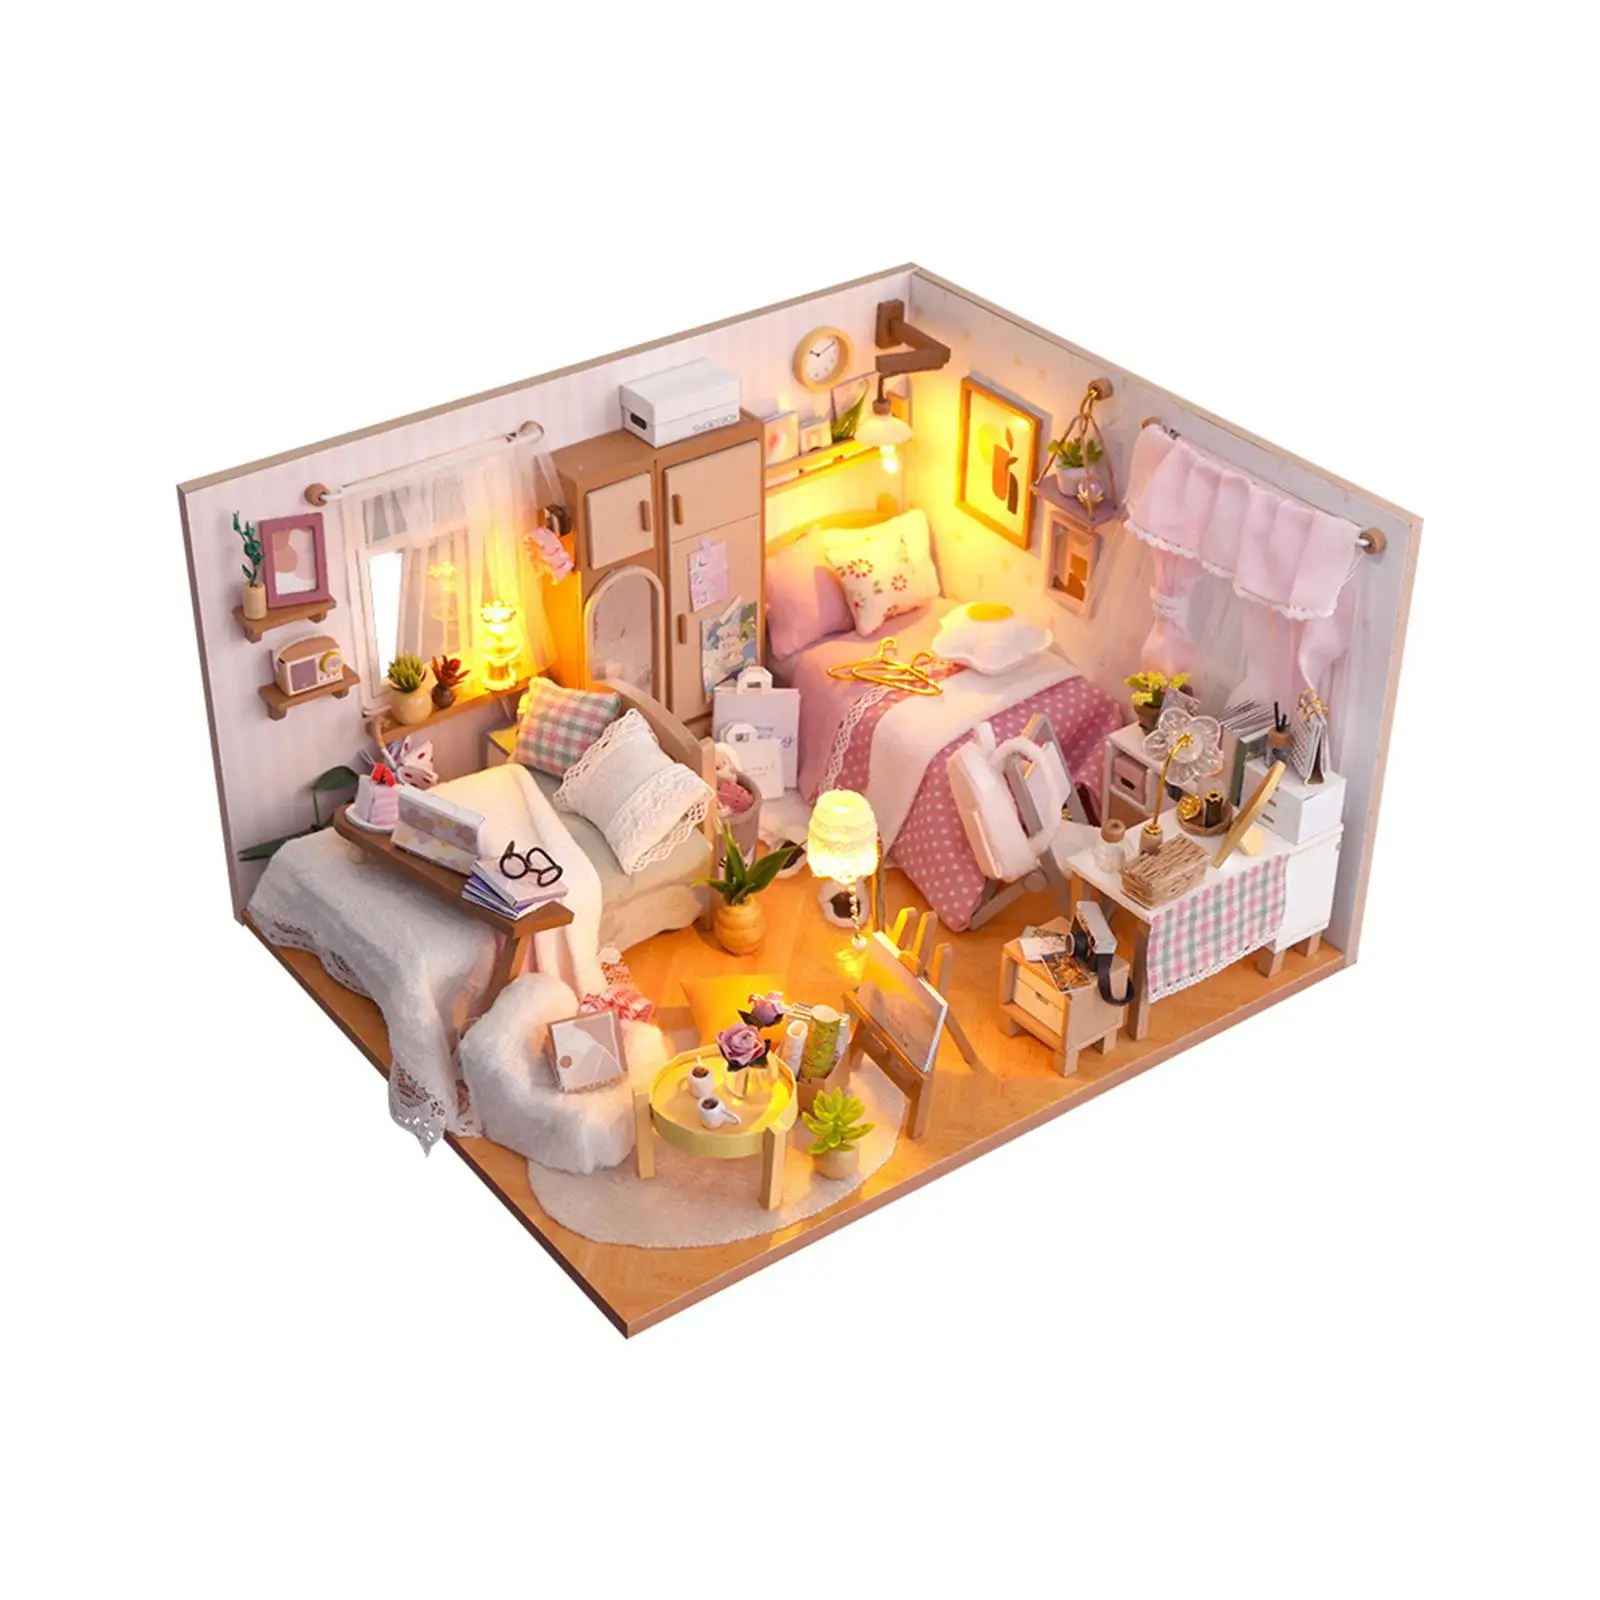 

Wooden Miniature Dollhouse Kits Easy to Assemble for Boys Girls Perfect Gift Artwork with Lights Fashion Doll House Model